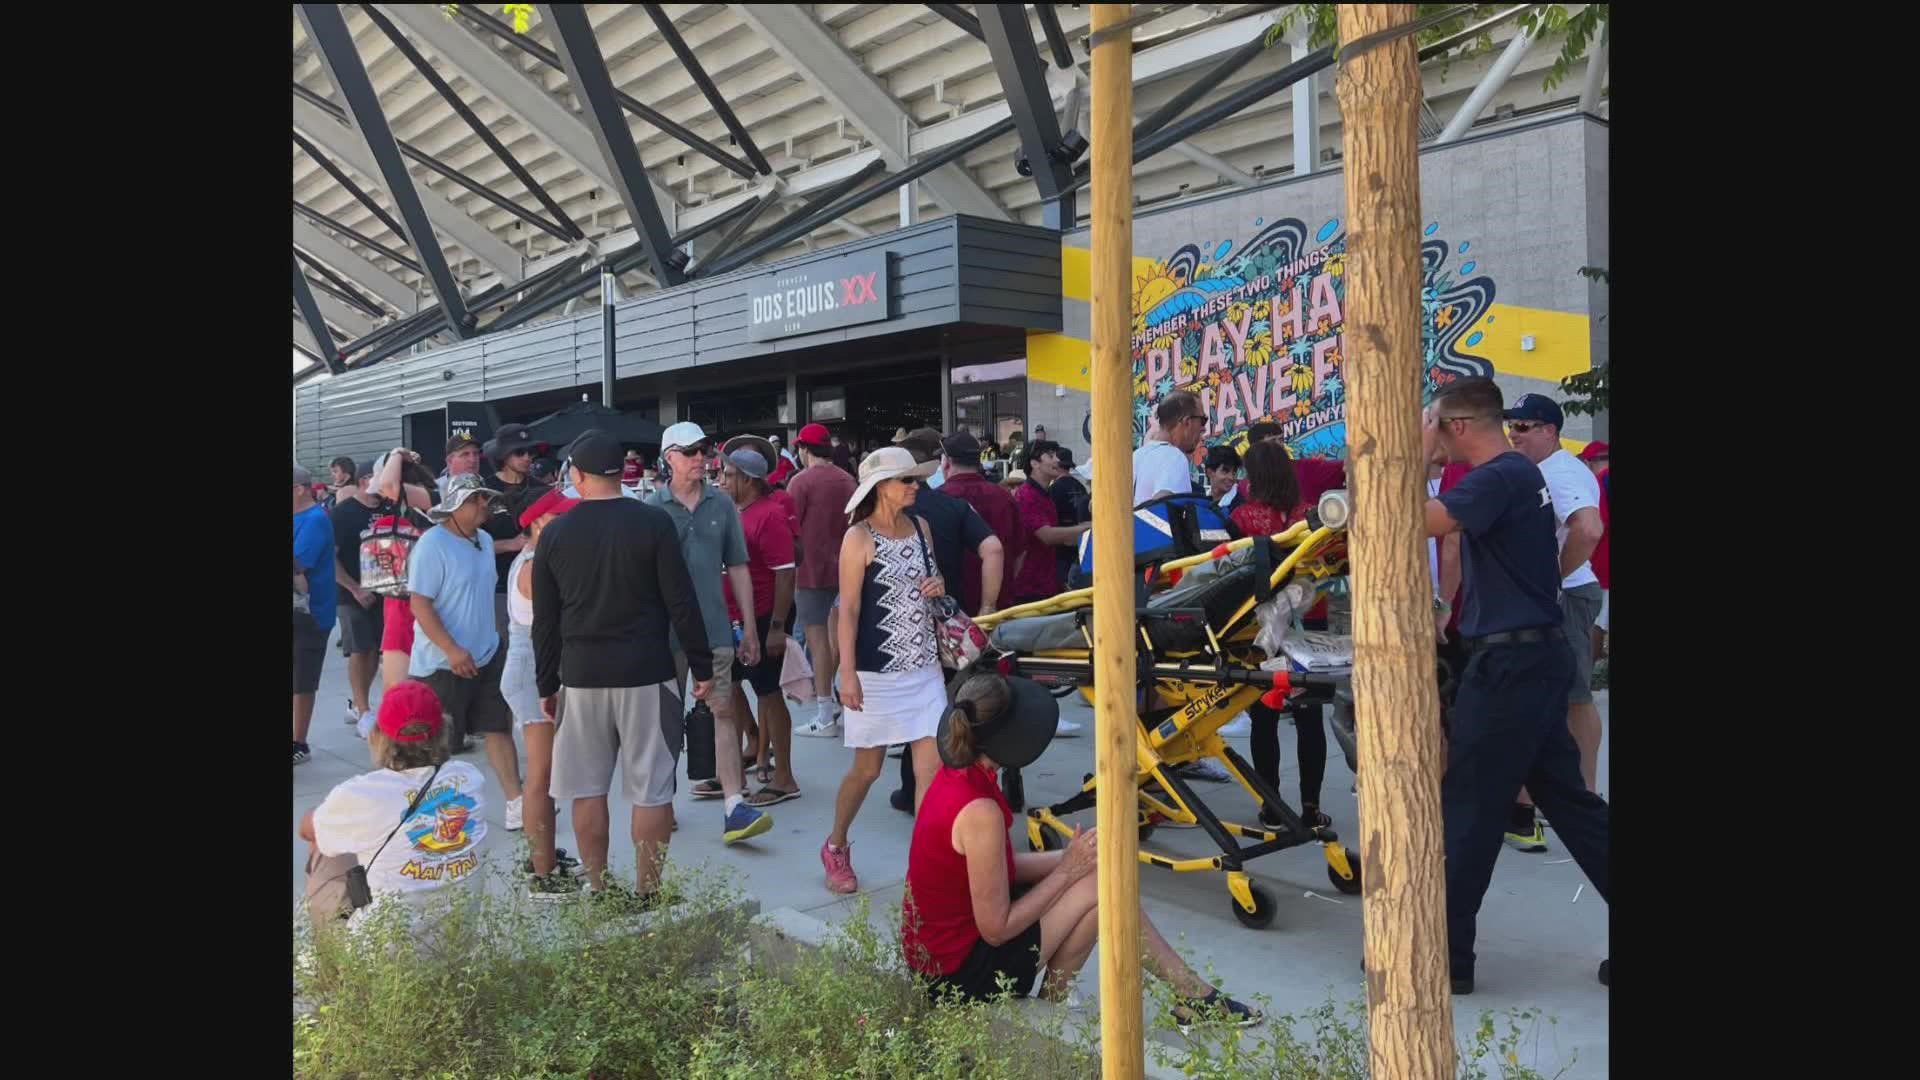 The San Diego Fire Department confirmed to CBS 8 that they were experiencing an abnormal amount of heat-related 911 calls at during the game at Snapdragon Stadium.